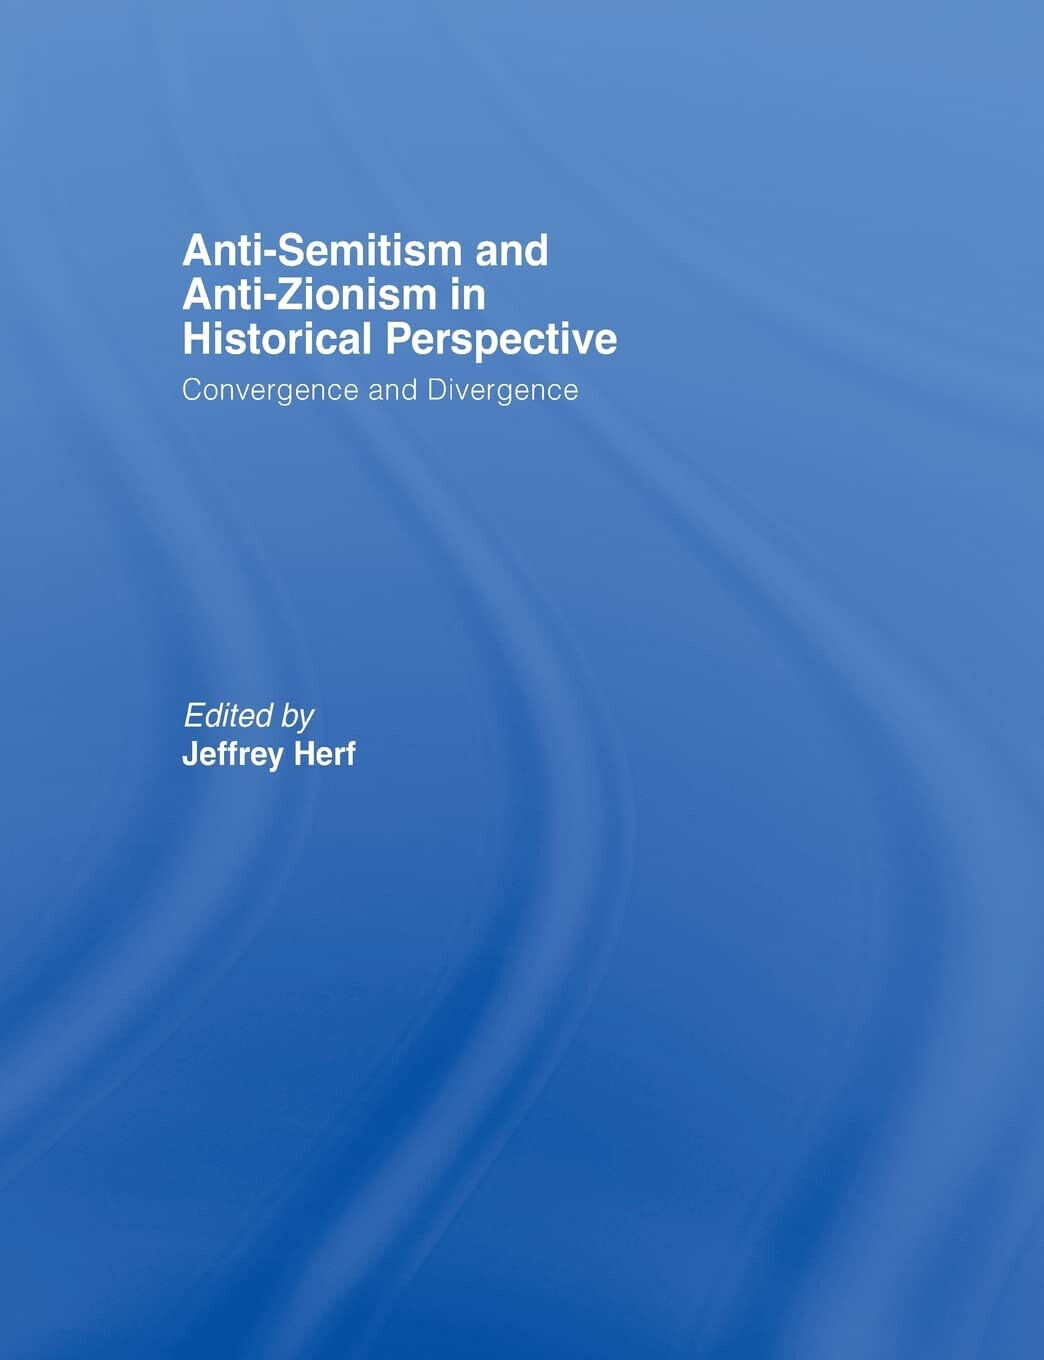 Anti-Semitism and Anti-Zionism in Historical Perspective - Jeffrey Herf - 2014 libro usato